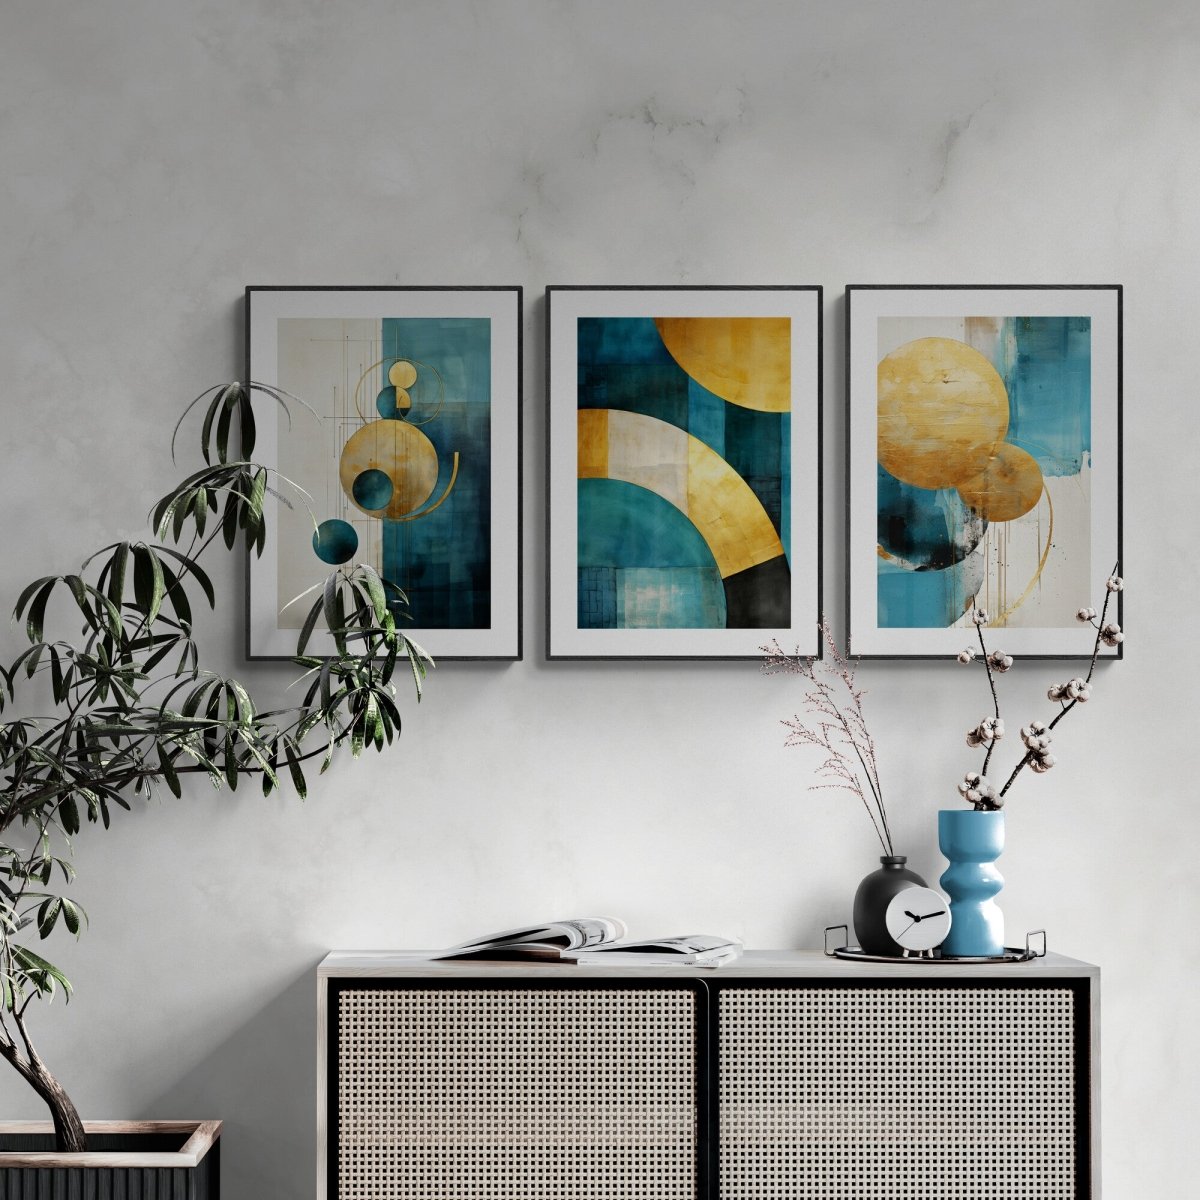 Petrol and Gold Wall Art Set of 3 Prints Abstract Petrol Design with Golden Round Shapes Living Room Decor Paper Poster Prints Minimalist Art - Everything Pixel